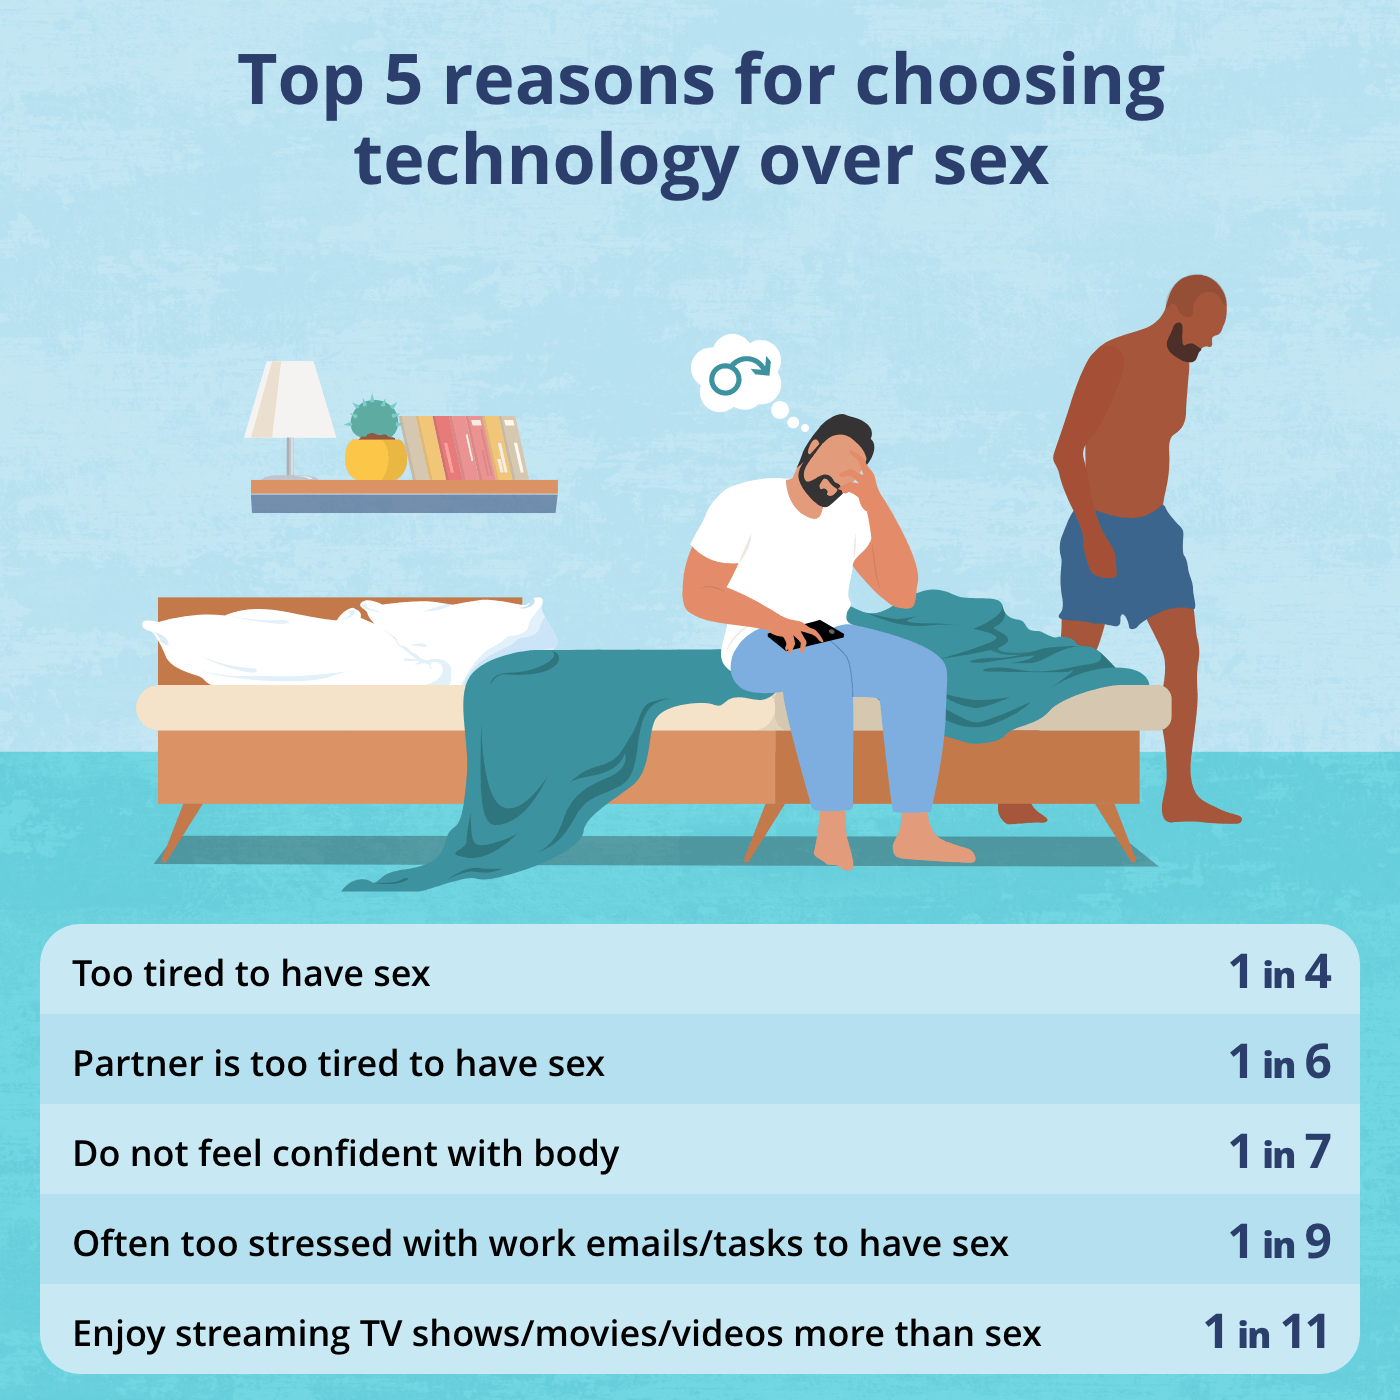 Top 5 reasons for choosing technology over sex